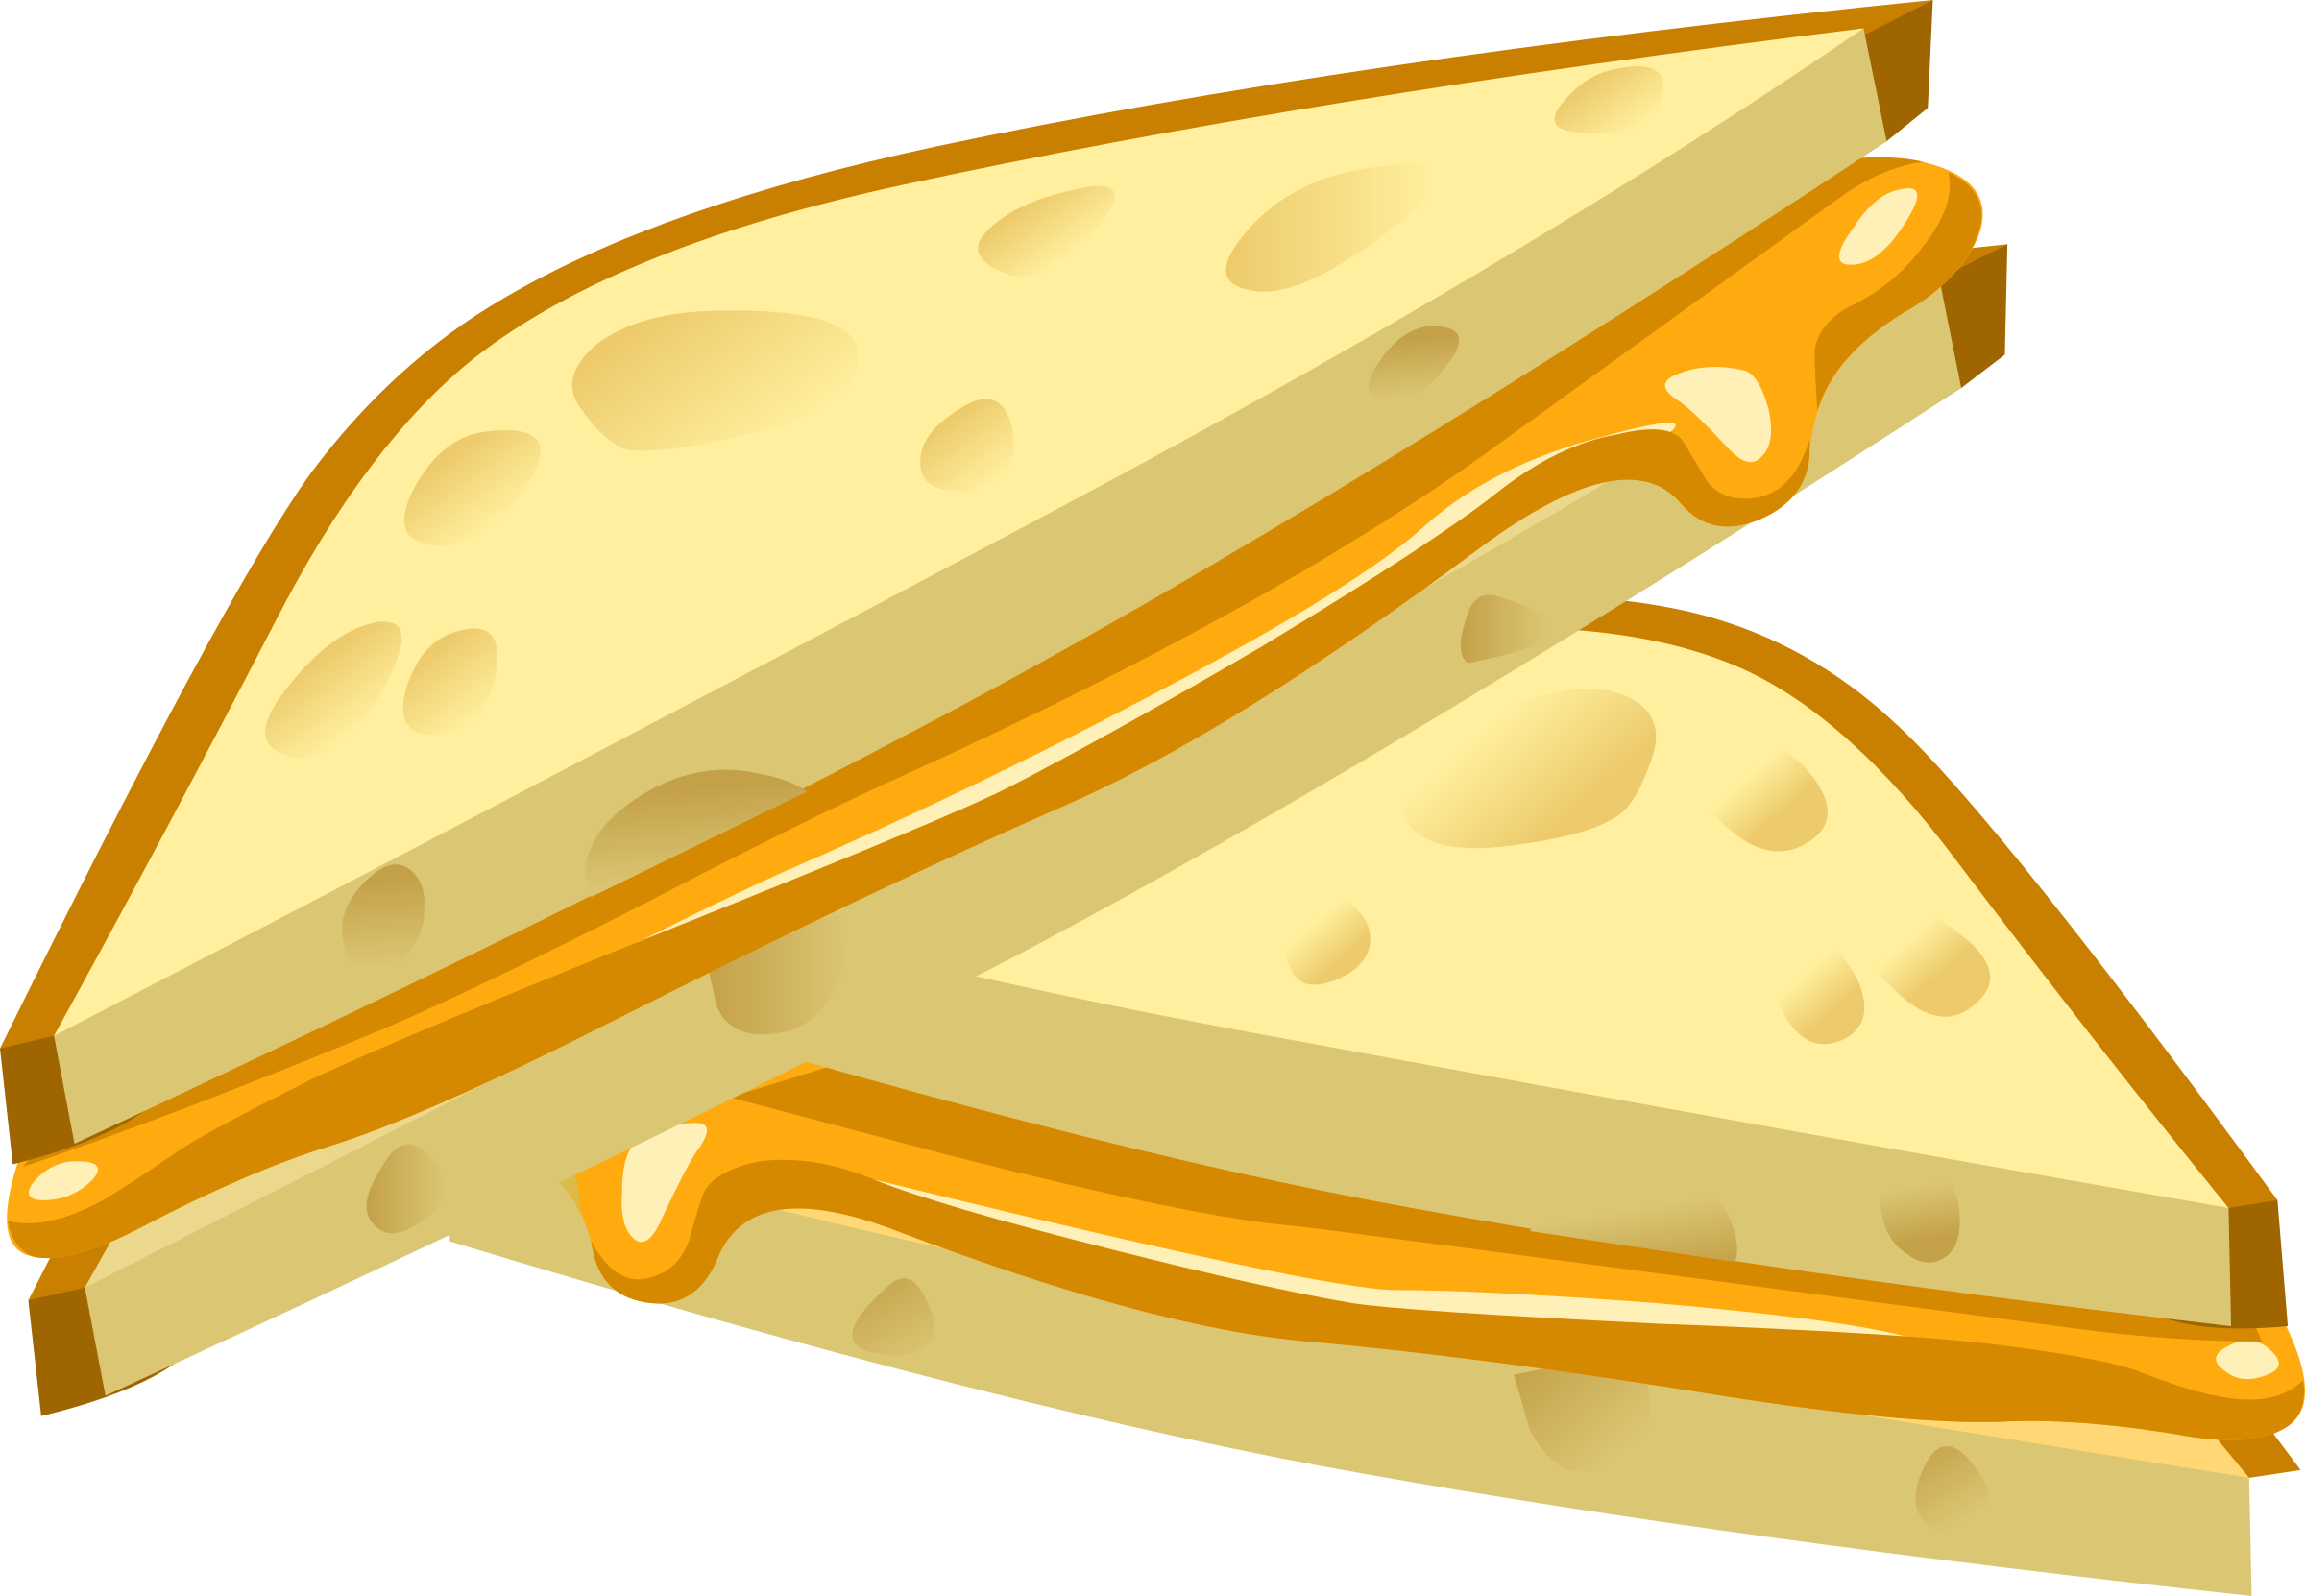 Grill clipart fourth july food. Grilled cheese big image